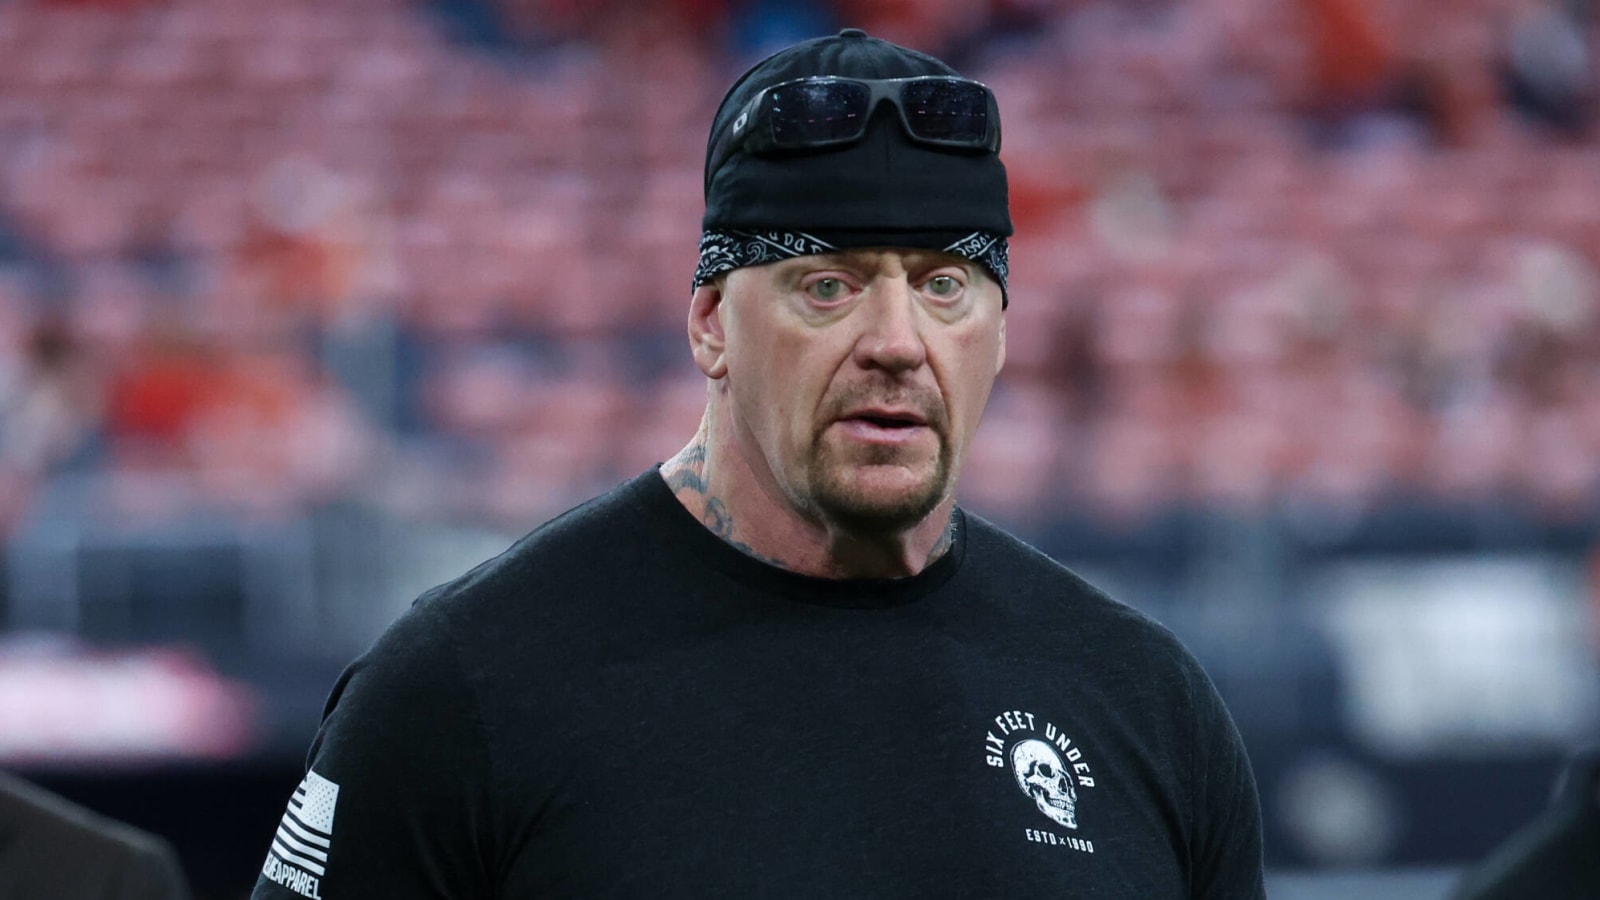 The Undertaker calls for a WWE roast show after getting inspired from Tom Brady Roast on Netflix, suggests two top names for it